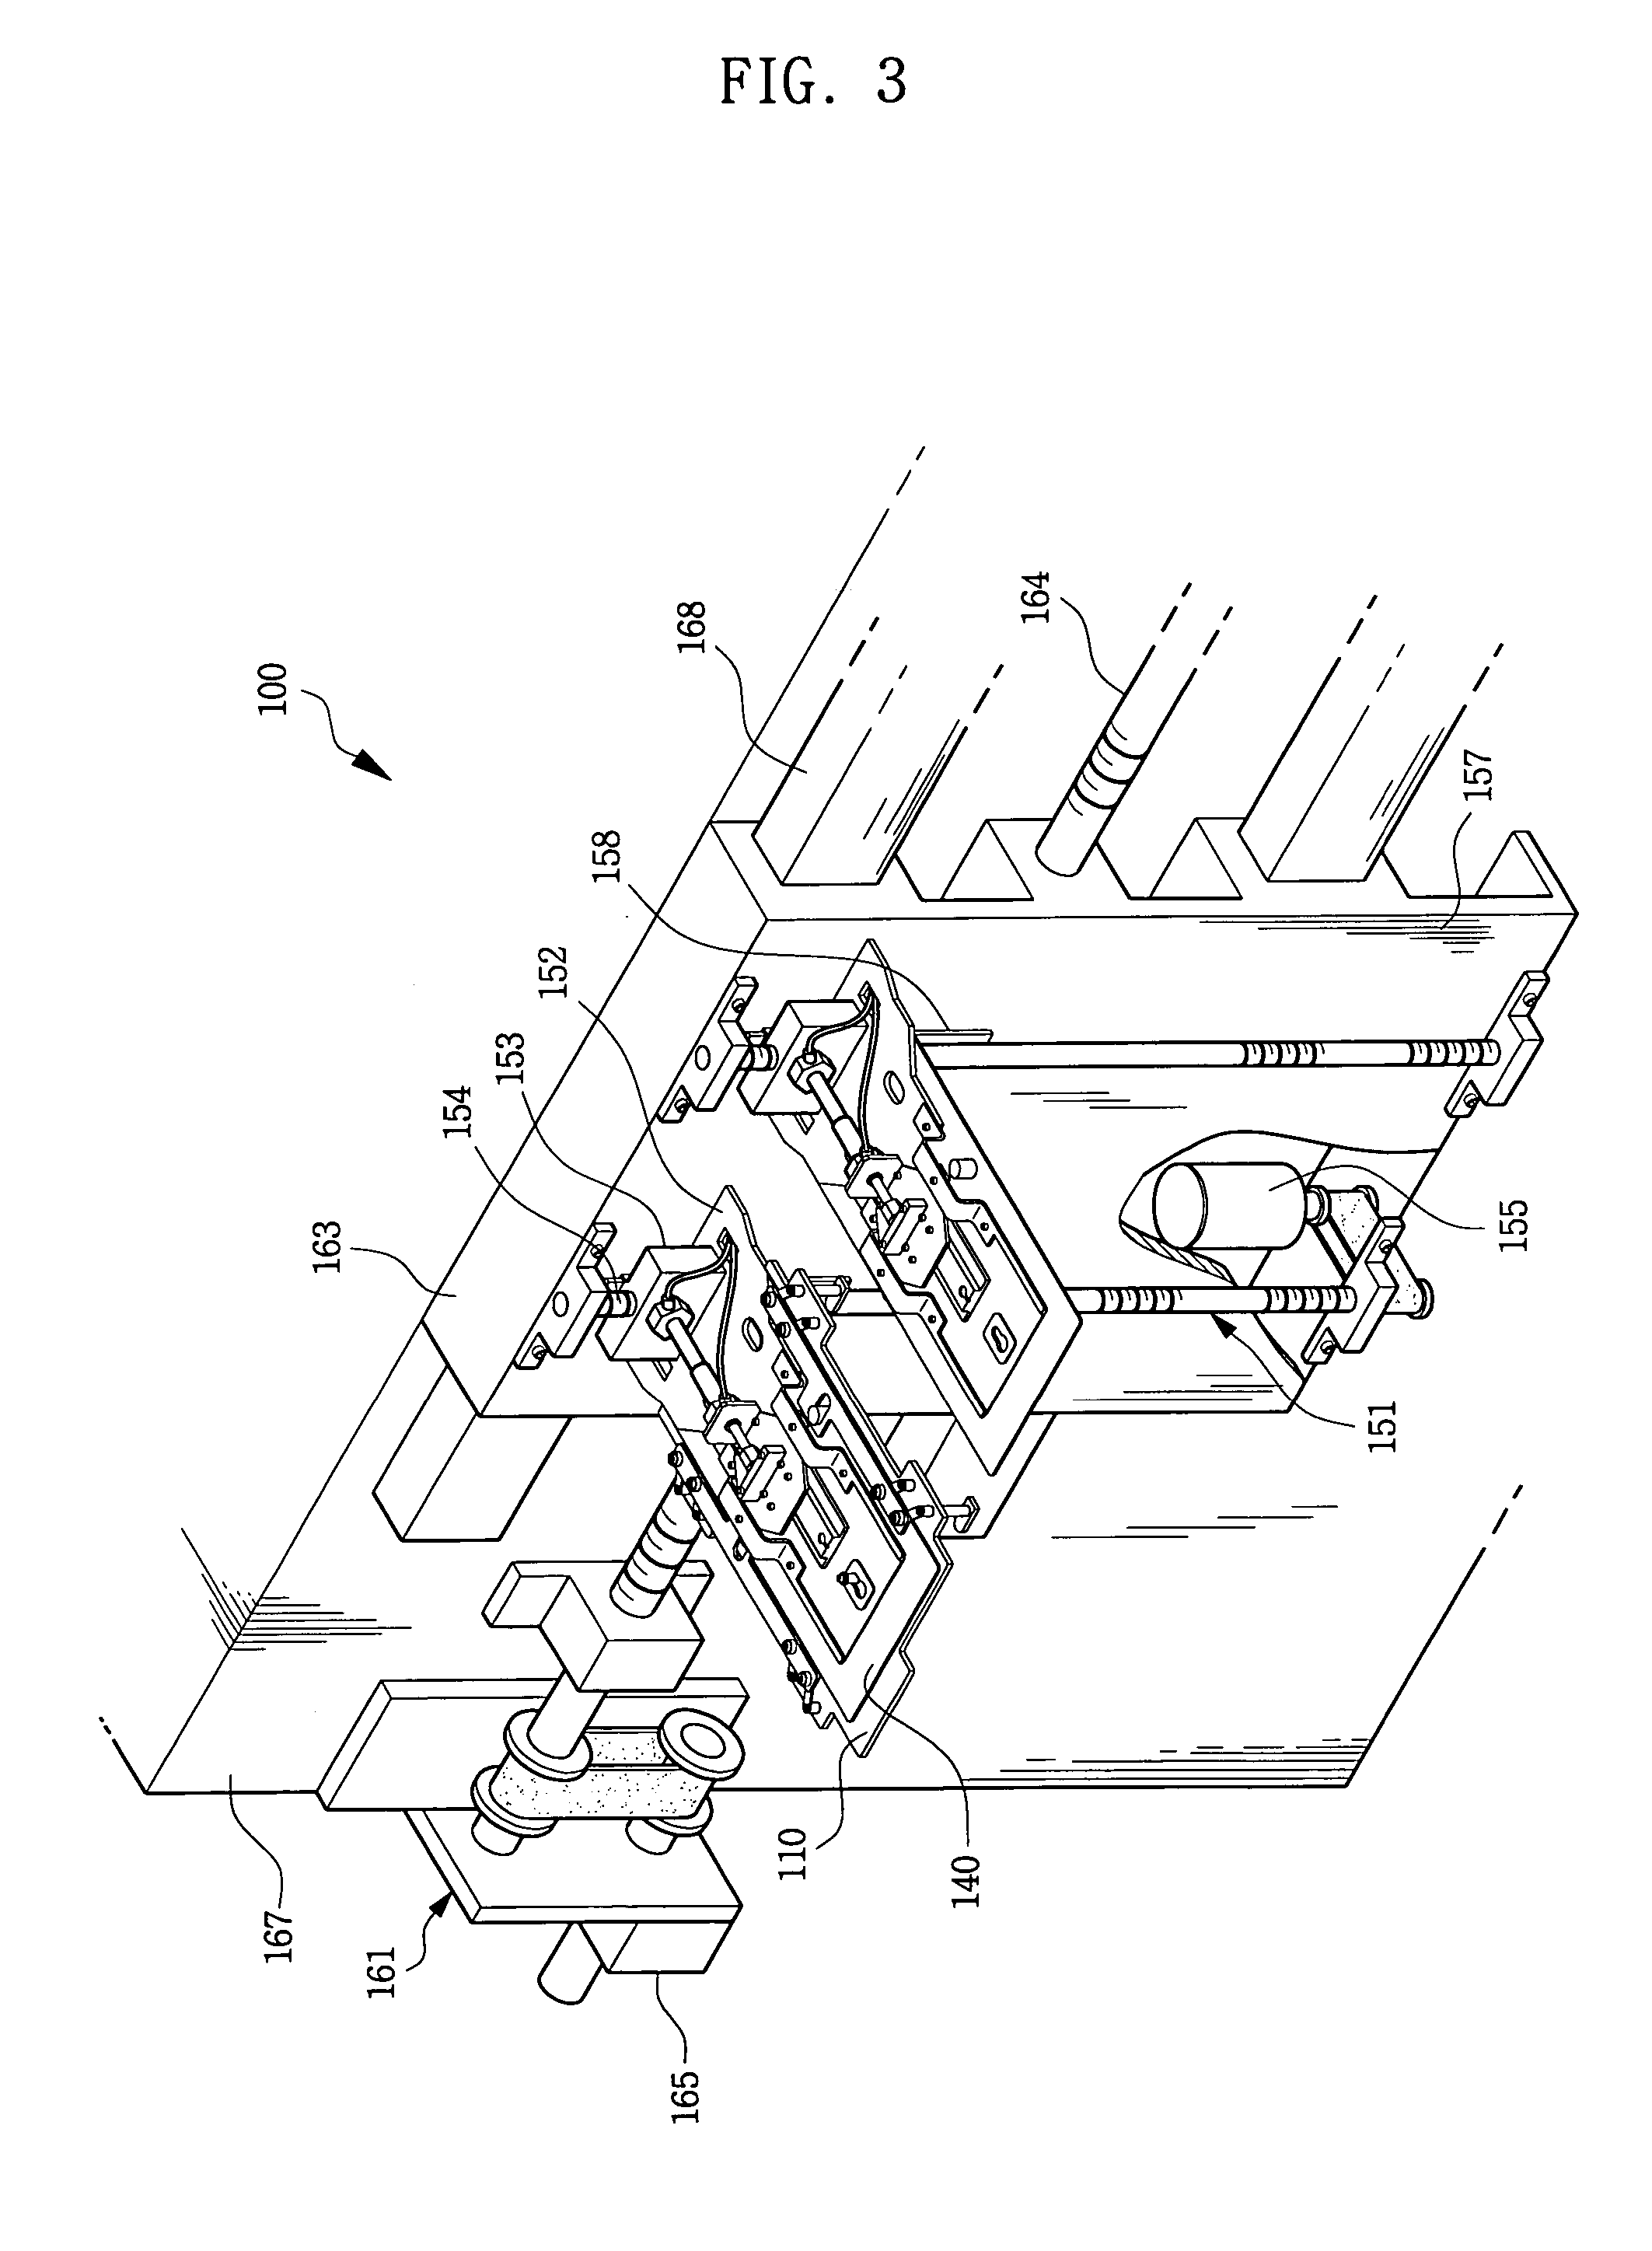 Tray transfer unit and automatic test handler having the same